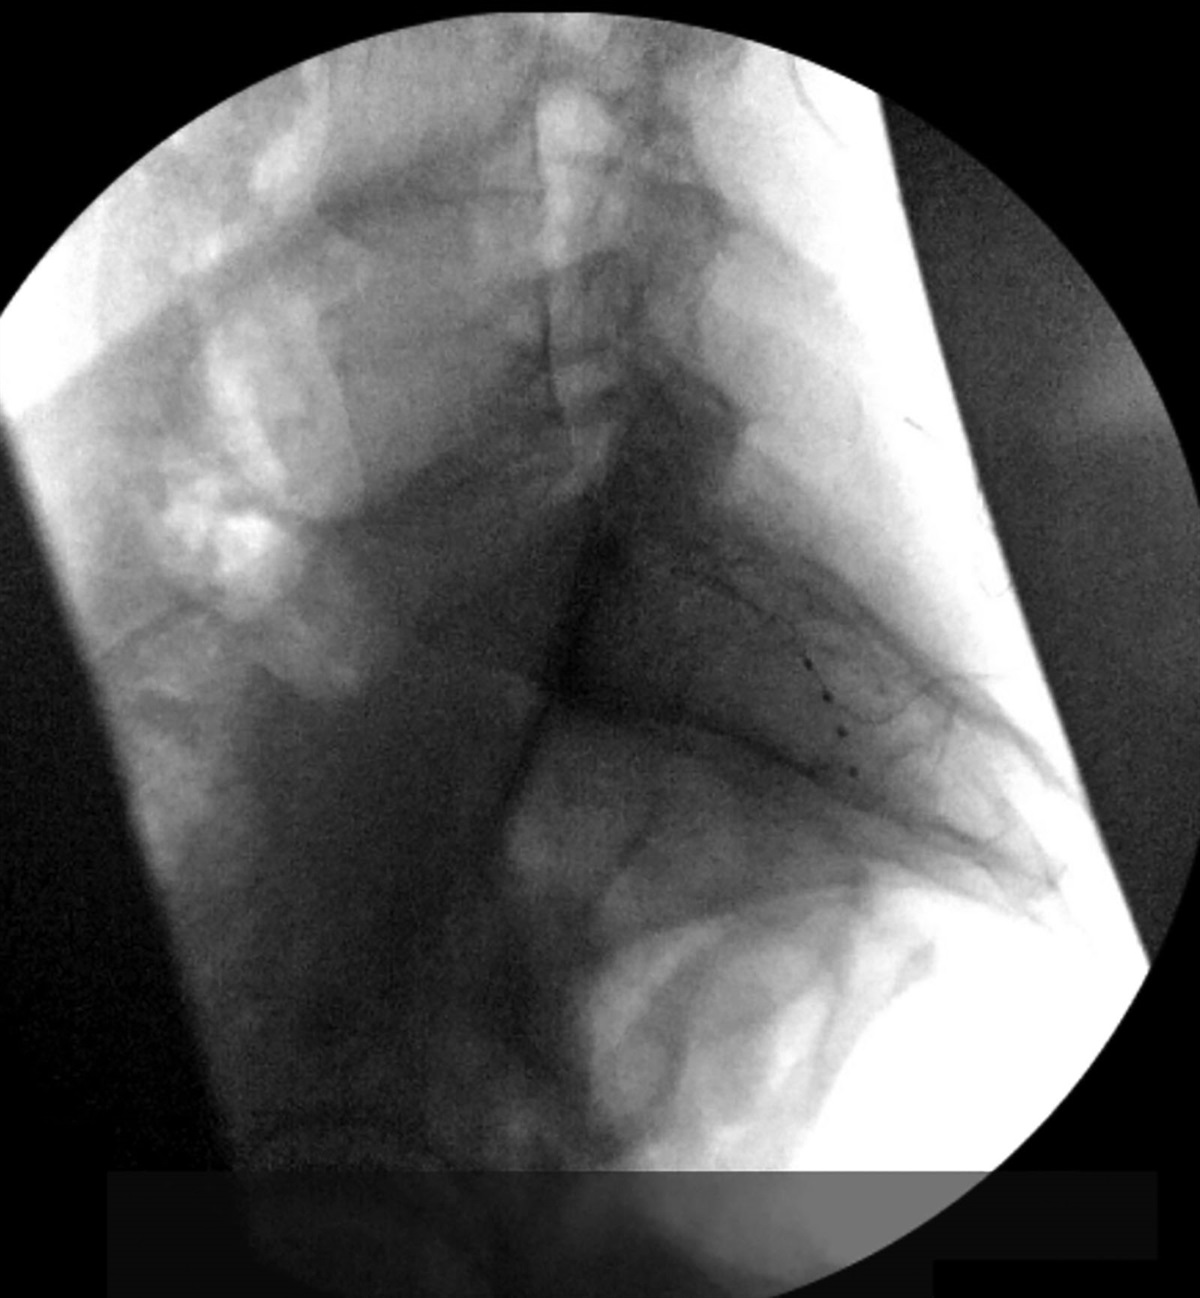 Use of a Sheath and Stylet for a Difficult Dorsal Root Ganglion Stimulation Lead Extraction: A Case Report